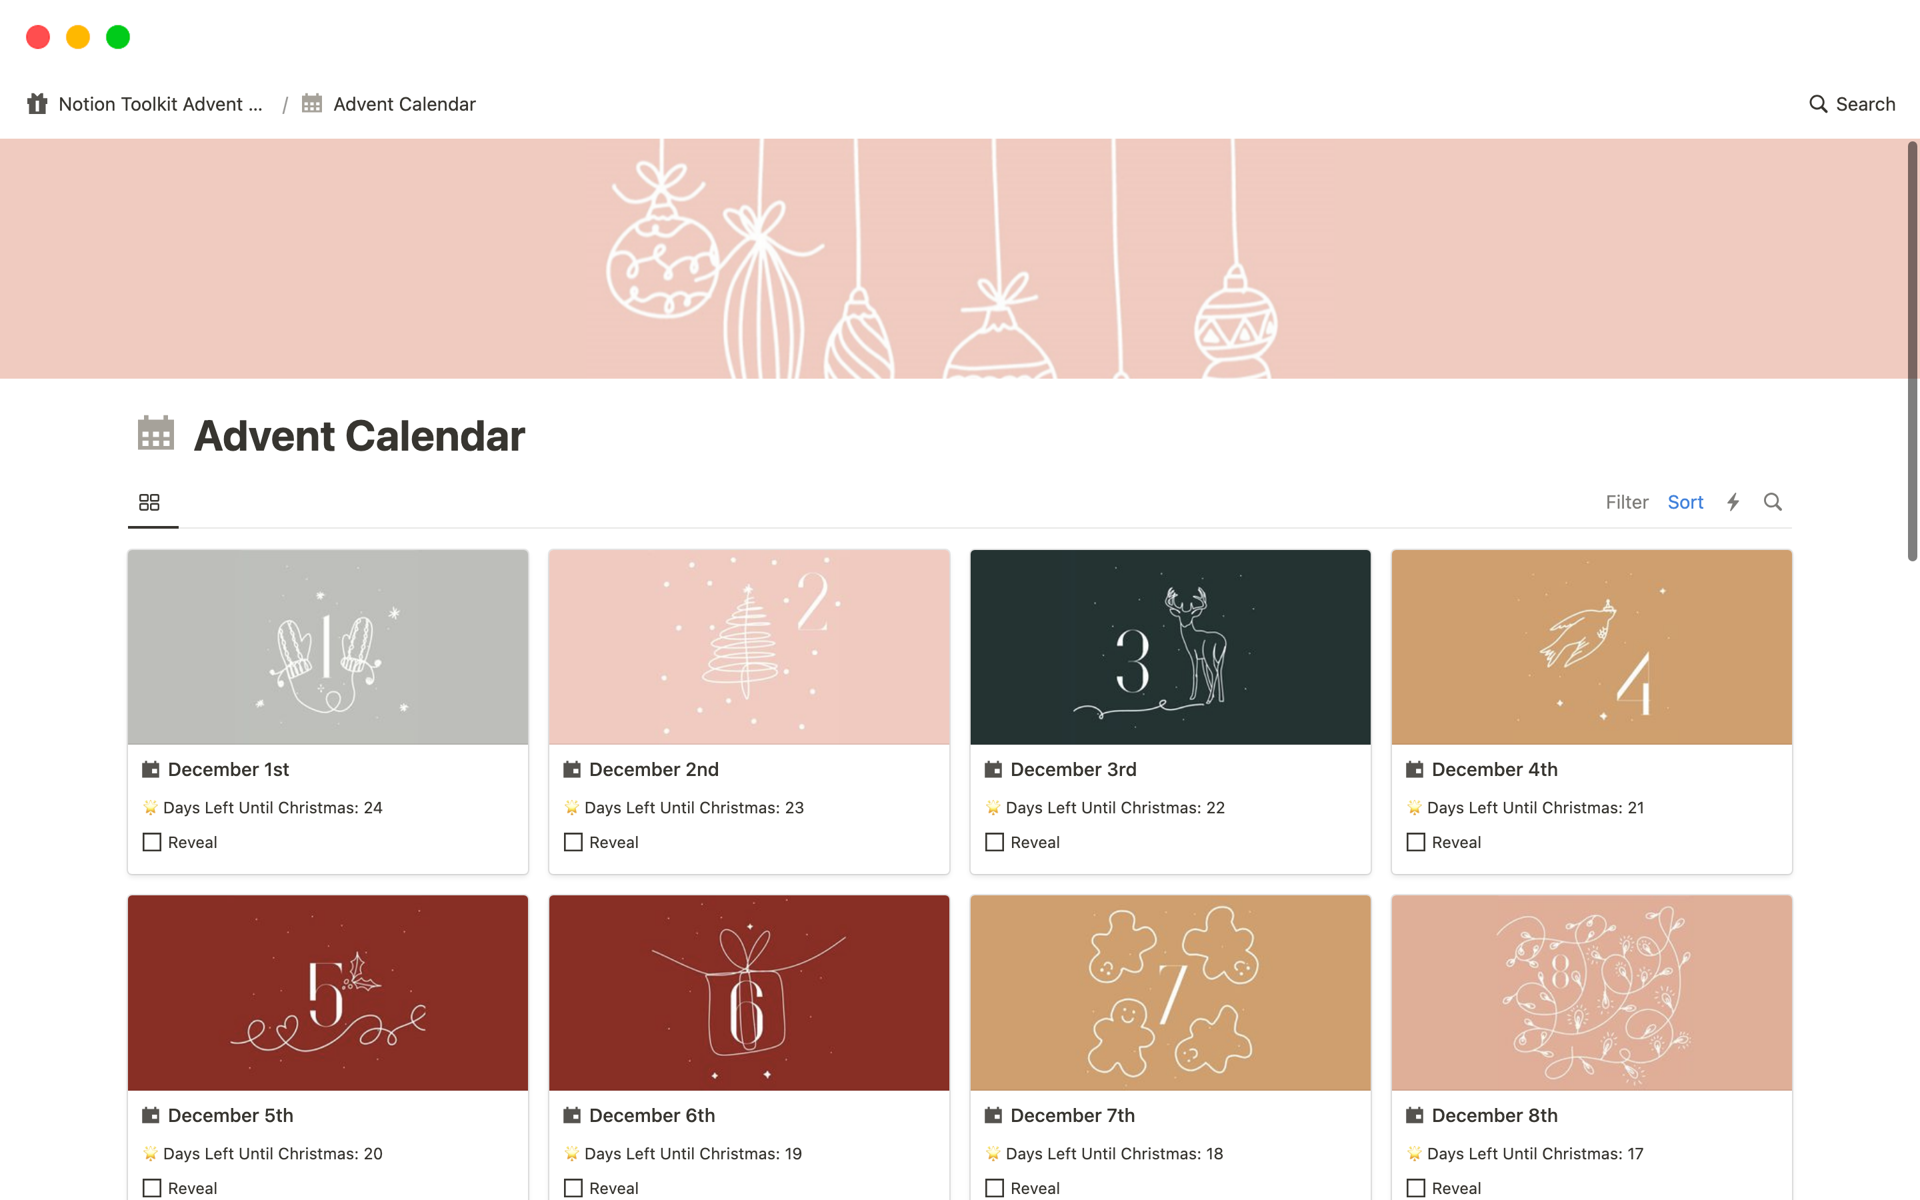 A template preview for Notion Toolkit Advent Calendar